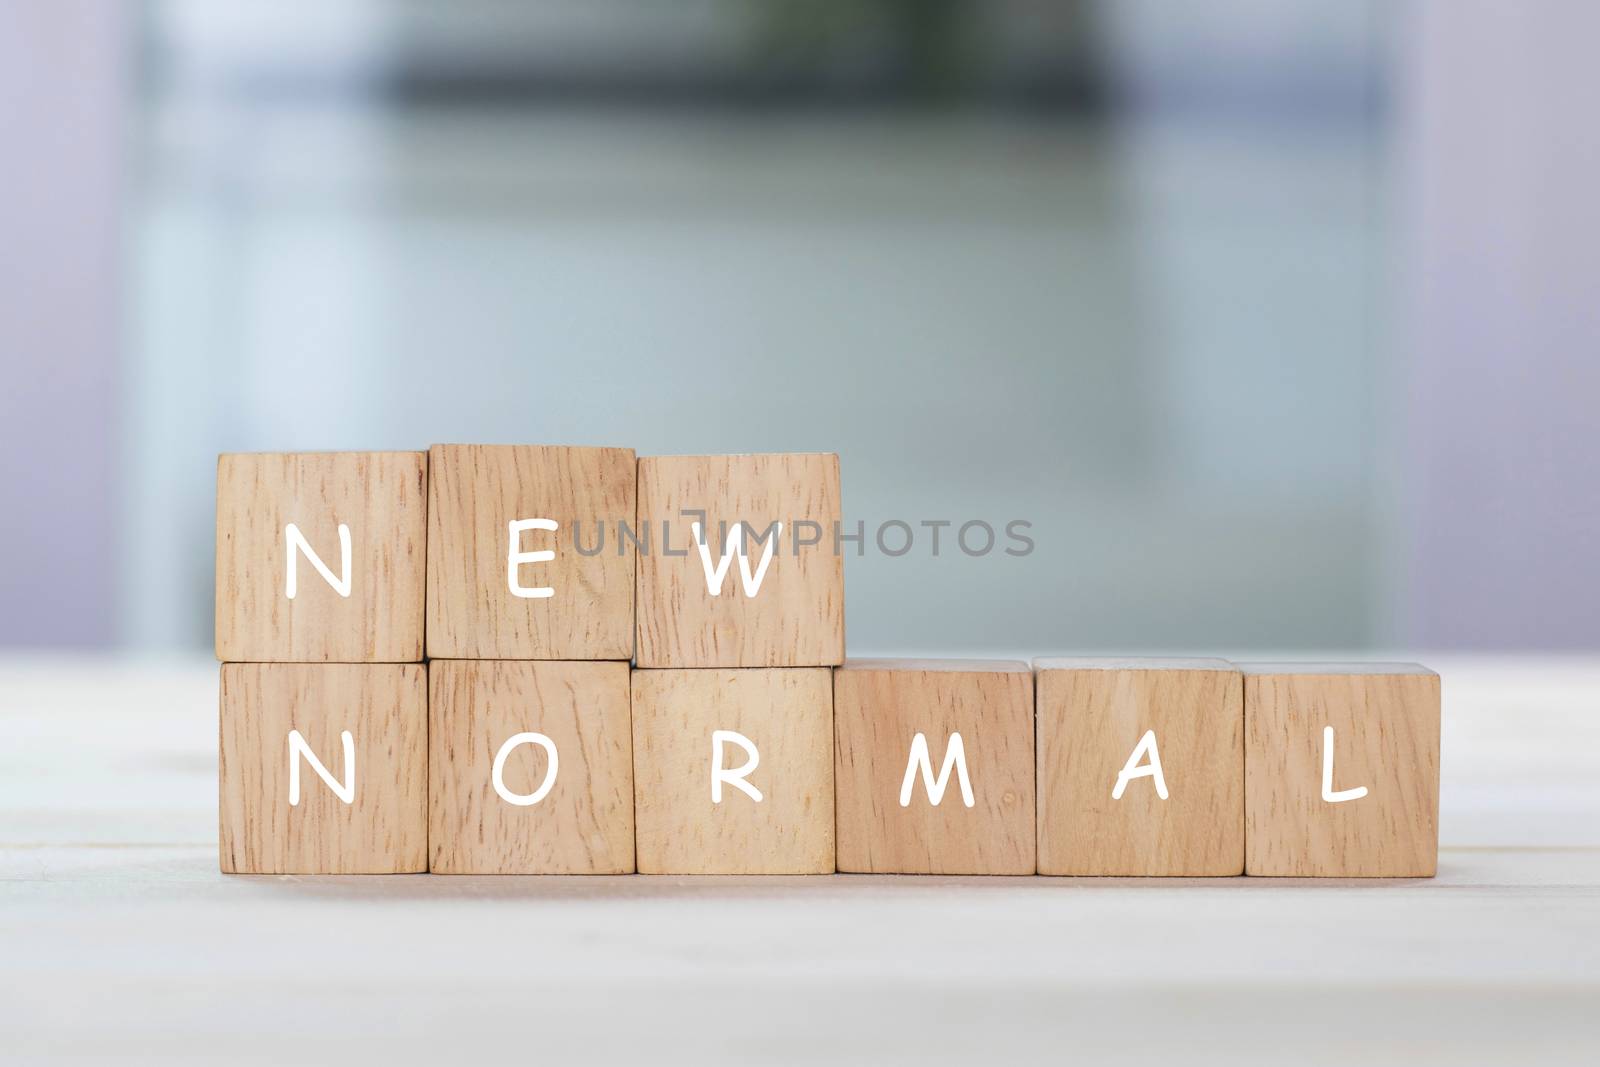 New normal on wooden cube with blurred background.